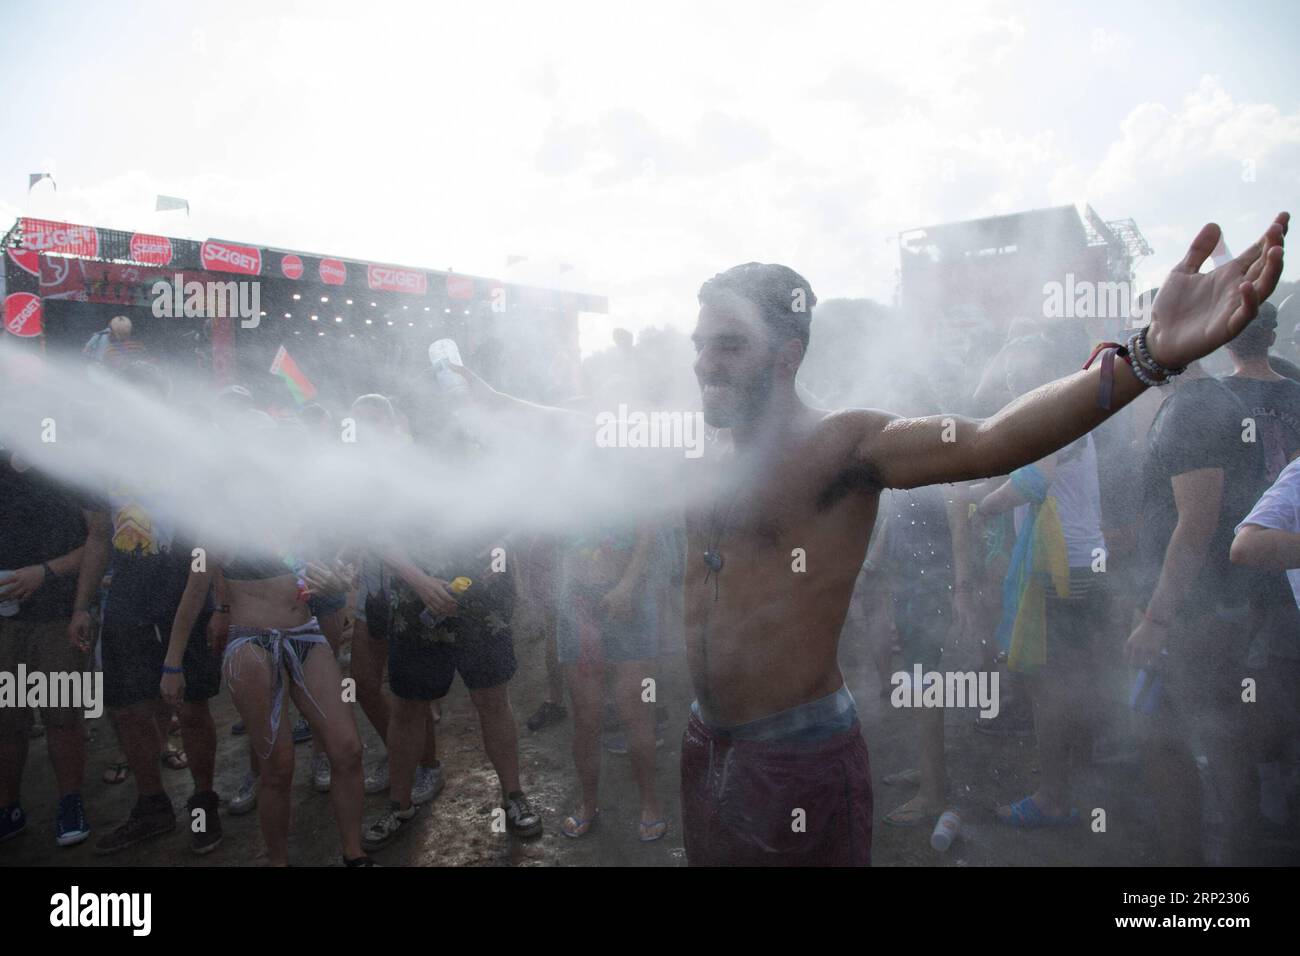 (180814) -- BUDAPEST, Aug. 14, 2018 -- Revellers cool down in a spray of water as they party in the record heat in front of the Main Stage at the Sziget Festival held in Budapest, Hungary on Aug. 13, 2018. ) (gj) HUNGARY-BUDAPEST-SZIGET FESTIVAL AttilaxVolgyi PUBLICATIONxNOTxINxCHN Stock Photo